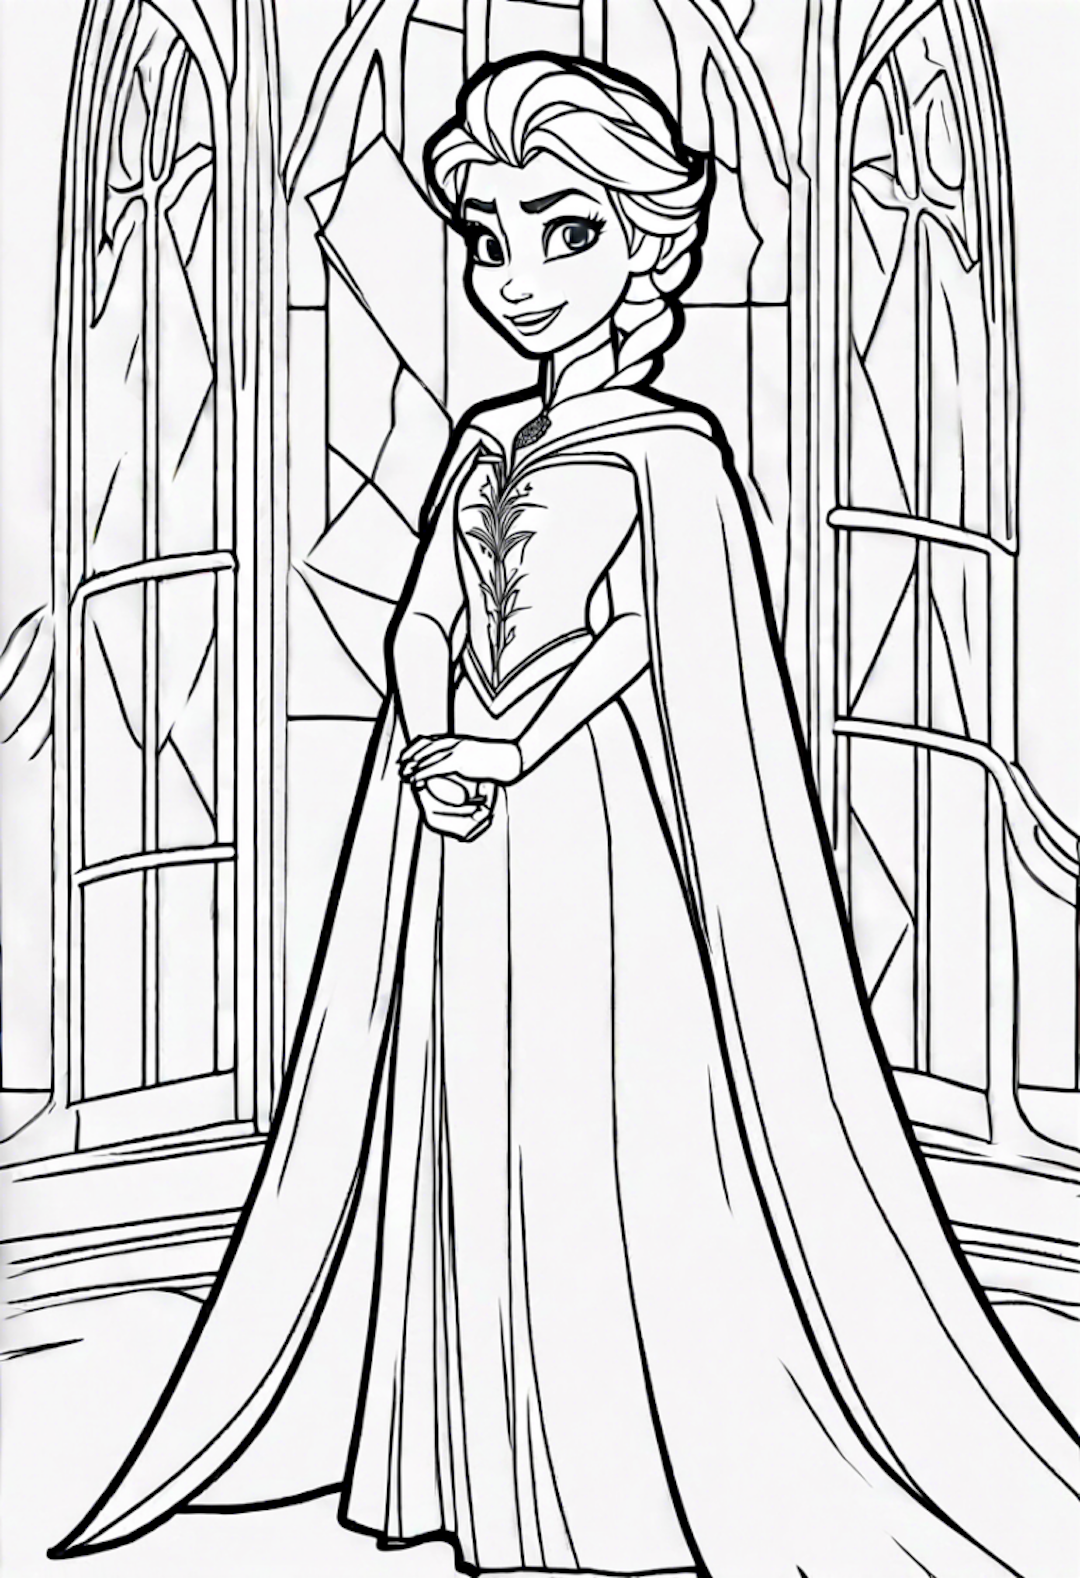 Elsa in the Castle Coloring Page coloring pages